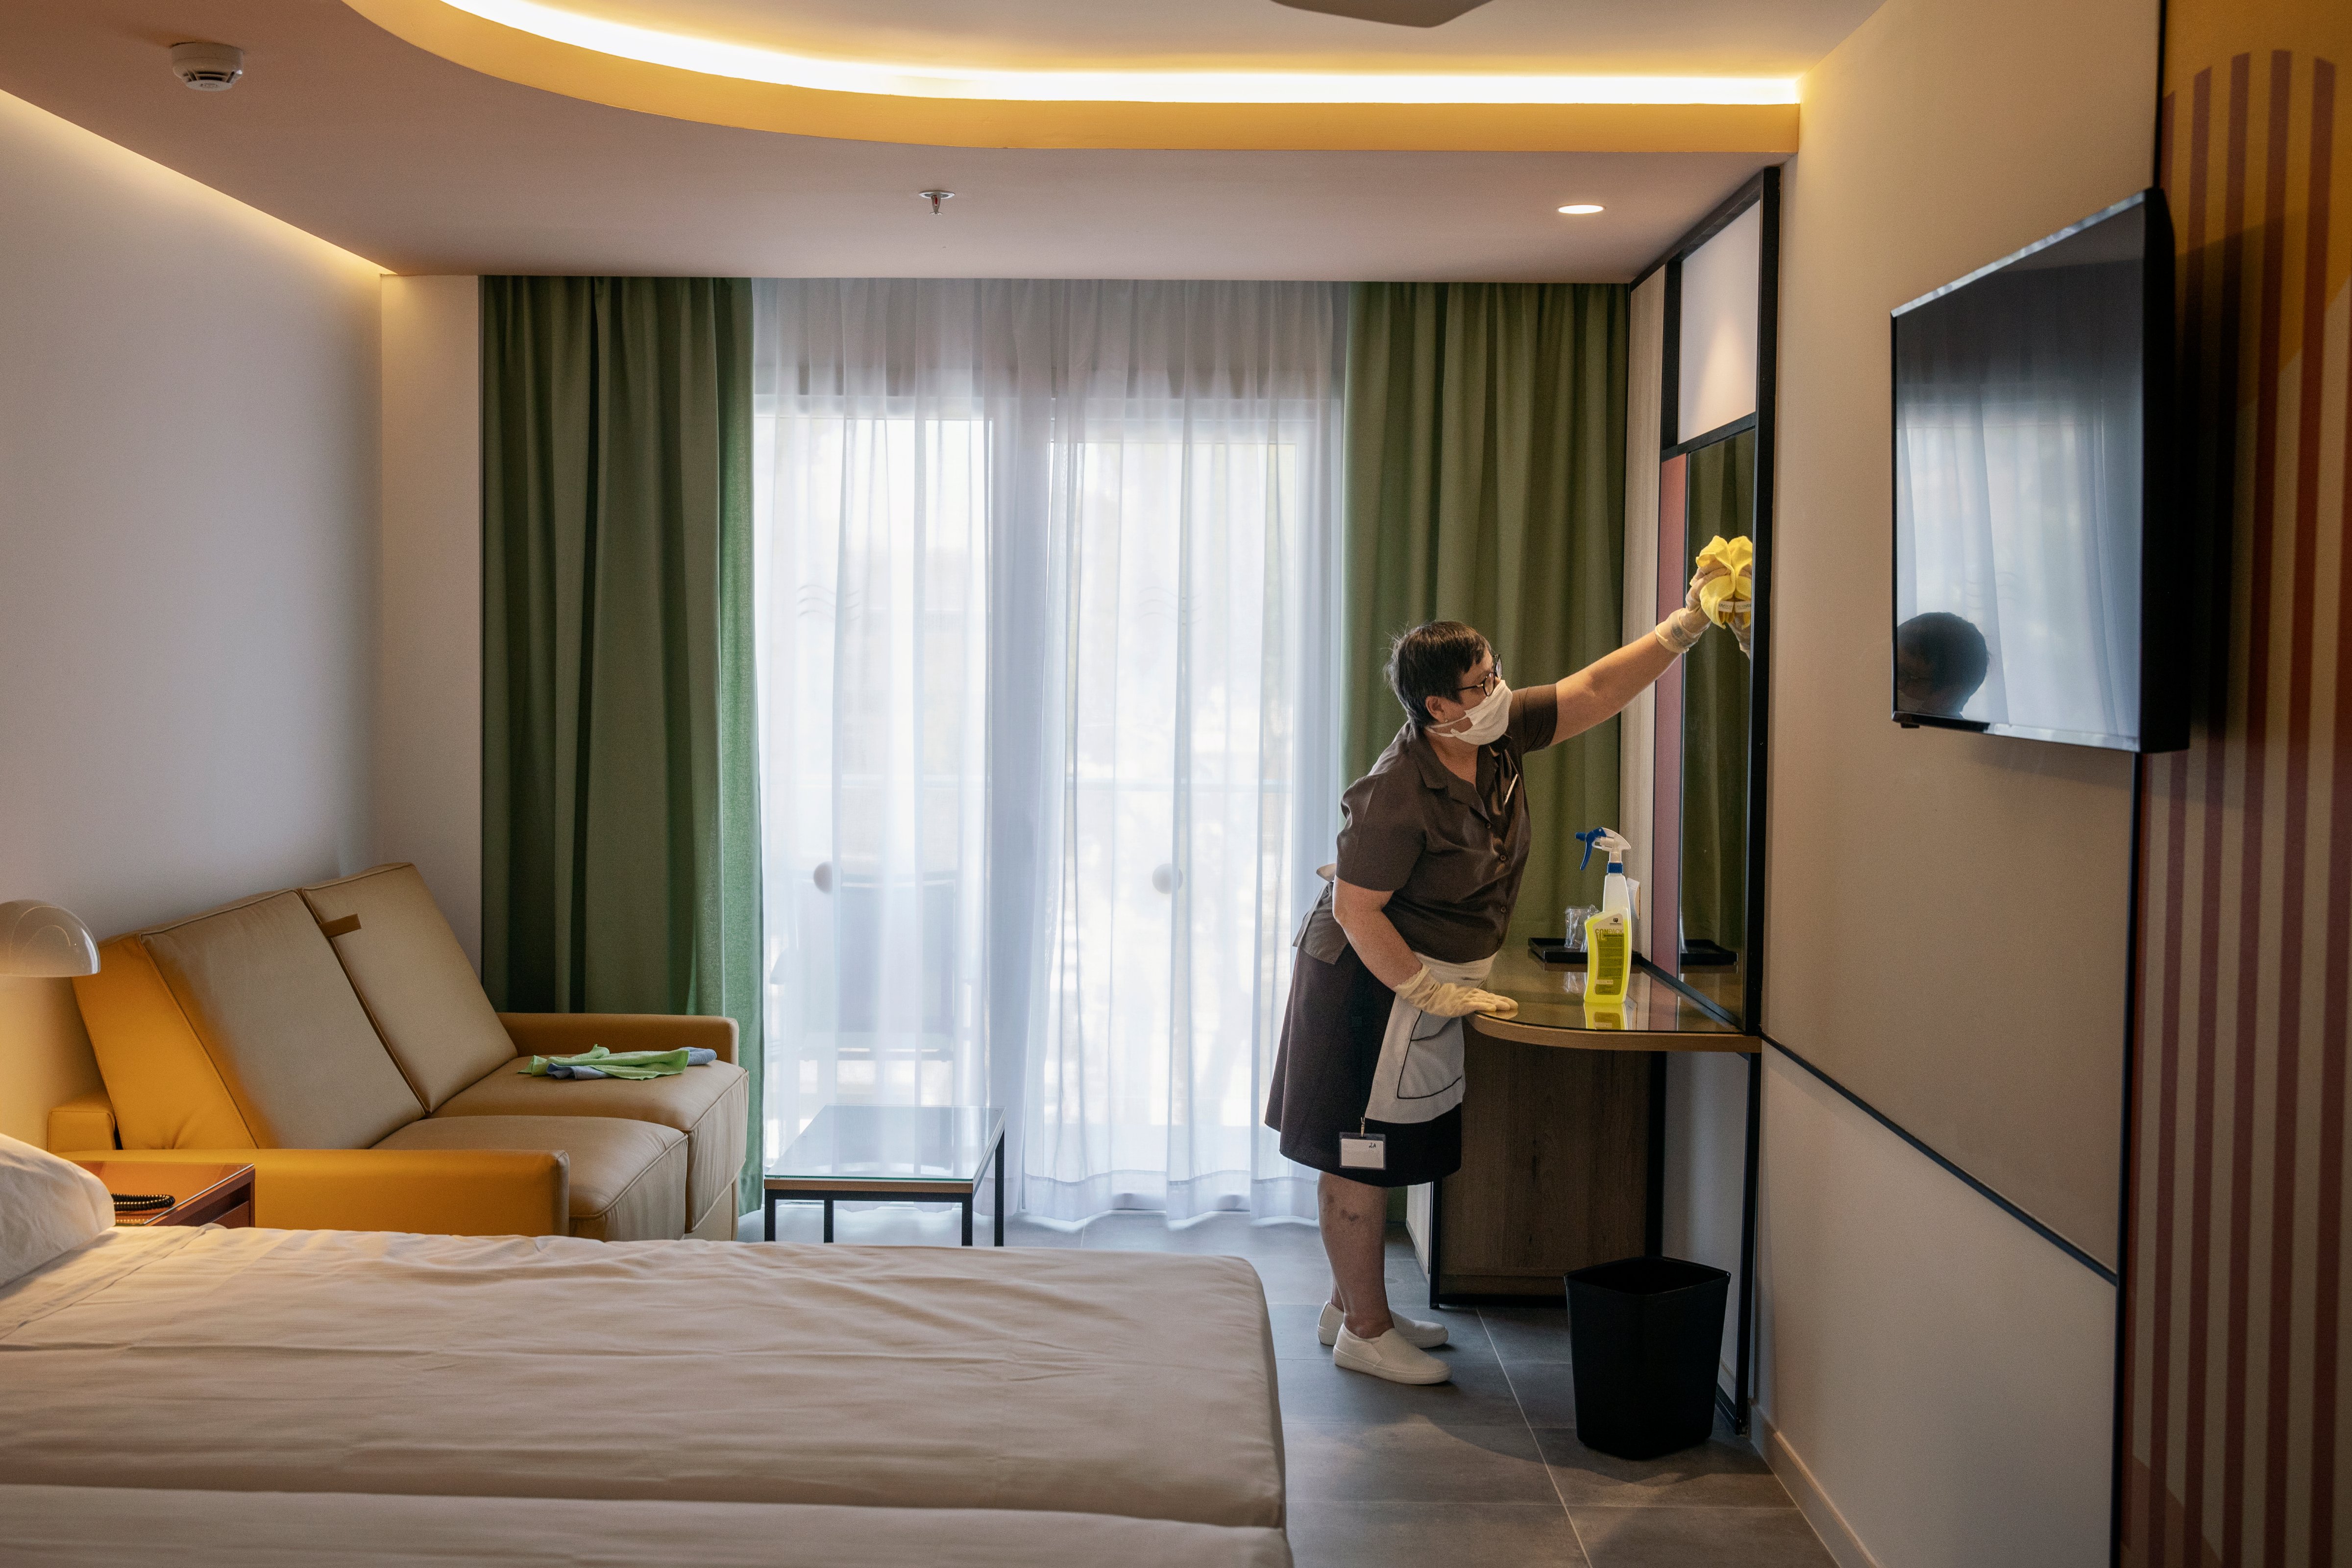 Playa de Palma, Mallorca, a member of the Riu Concordia Hotel staff at work cleaning and disinfecting a room on June 16, 2020. (Paolo Verzone—VU for TIME)